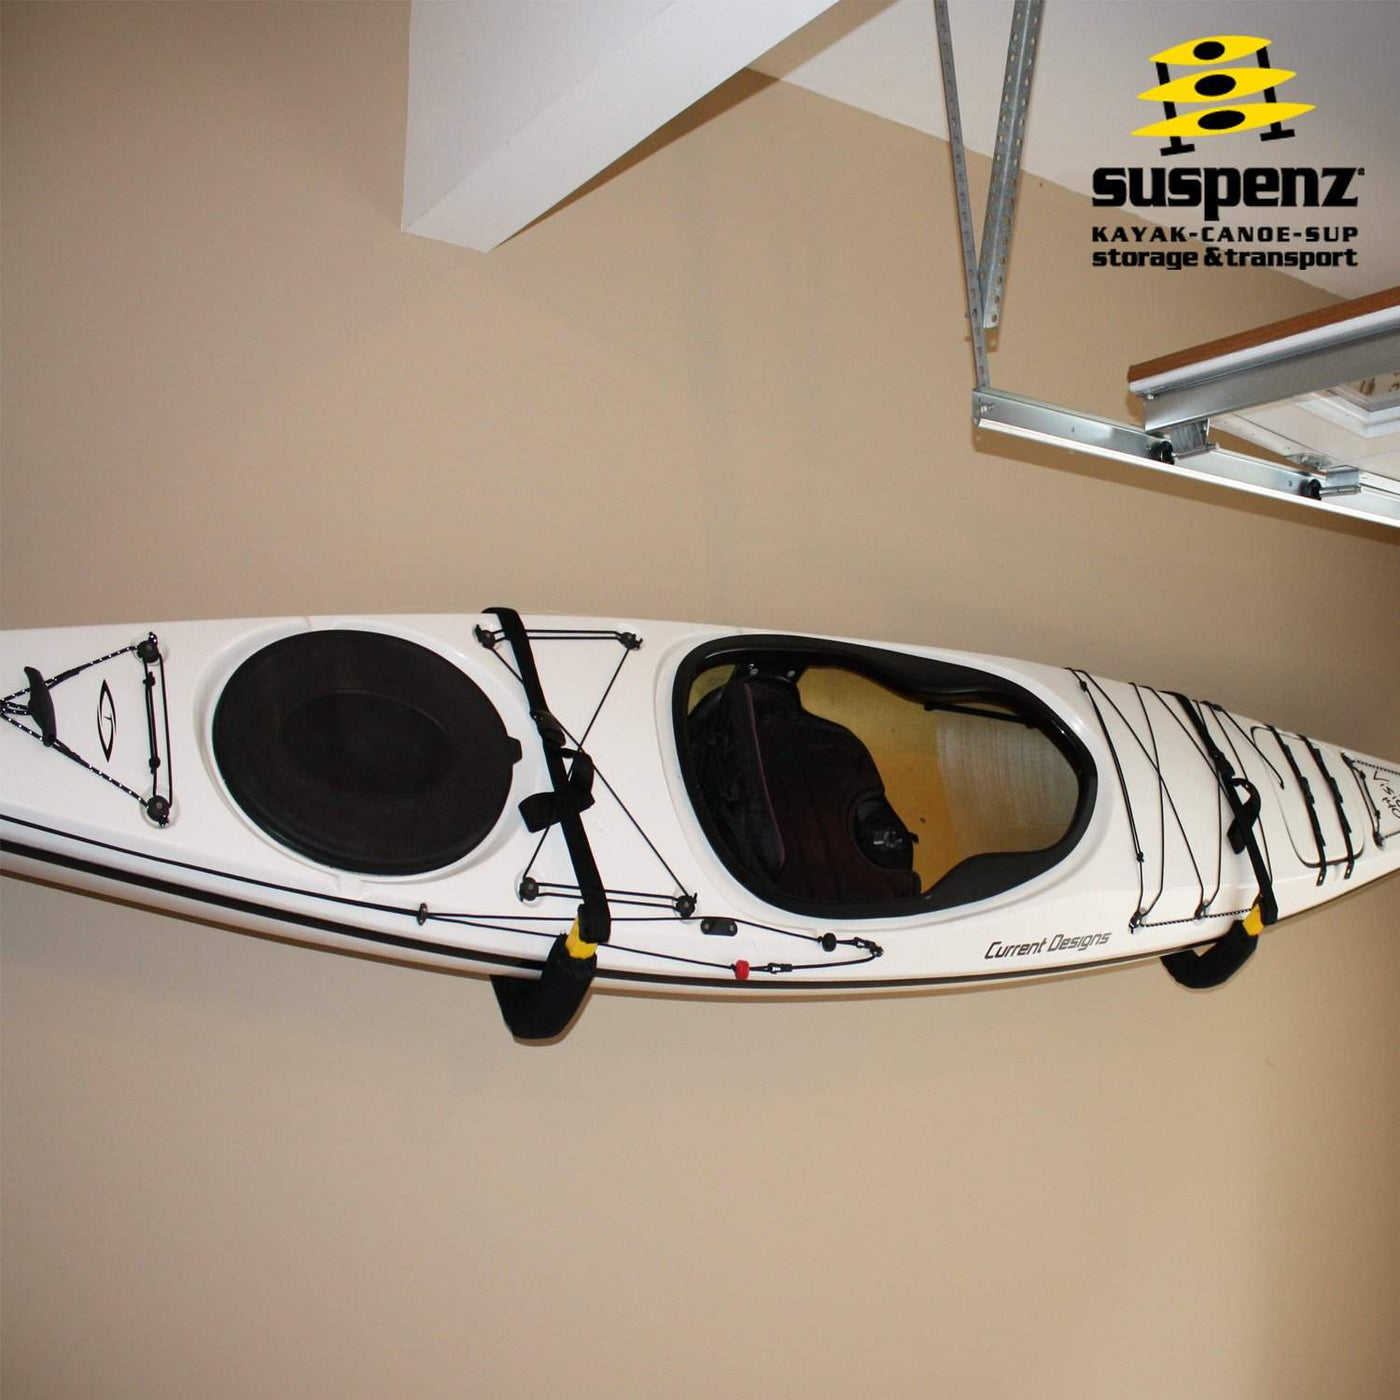 A white kayak resting on an ez rack mounted to a garage wall